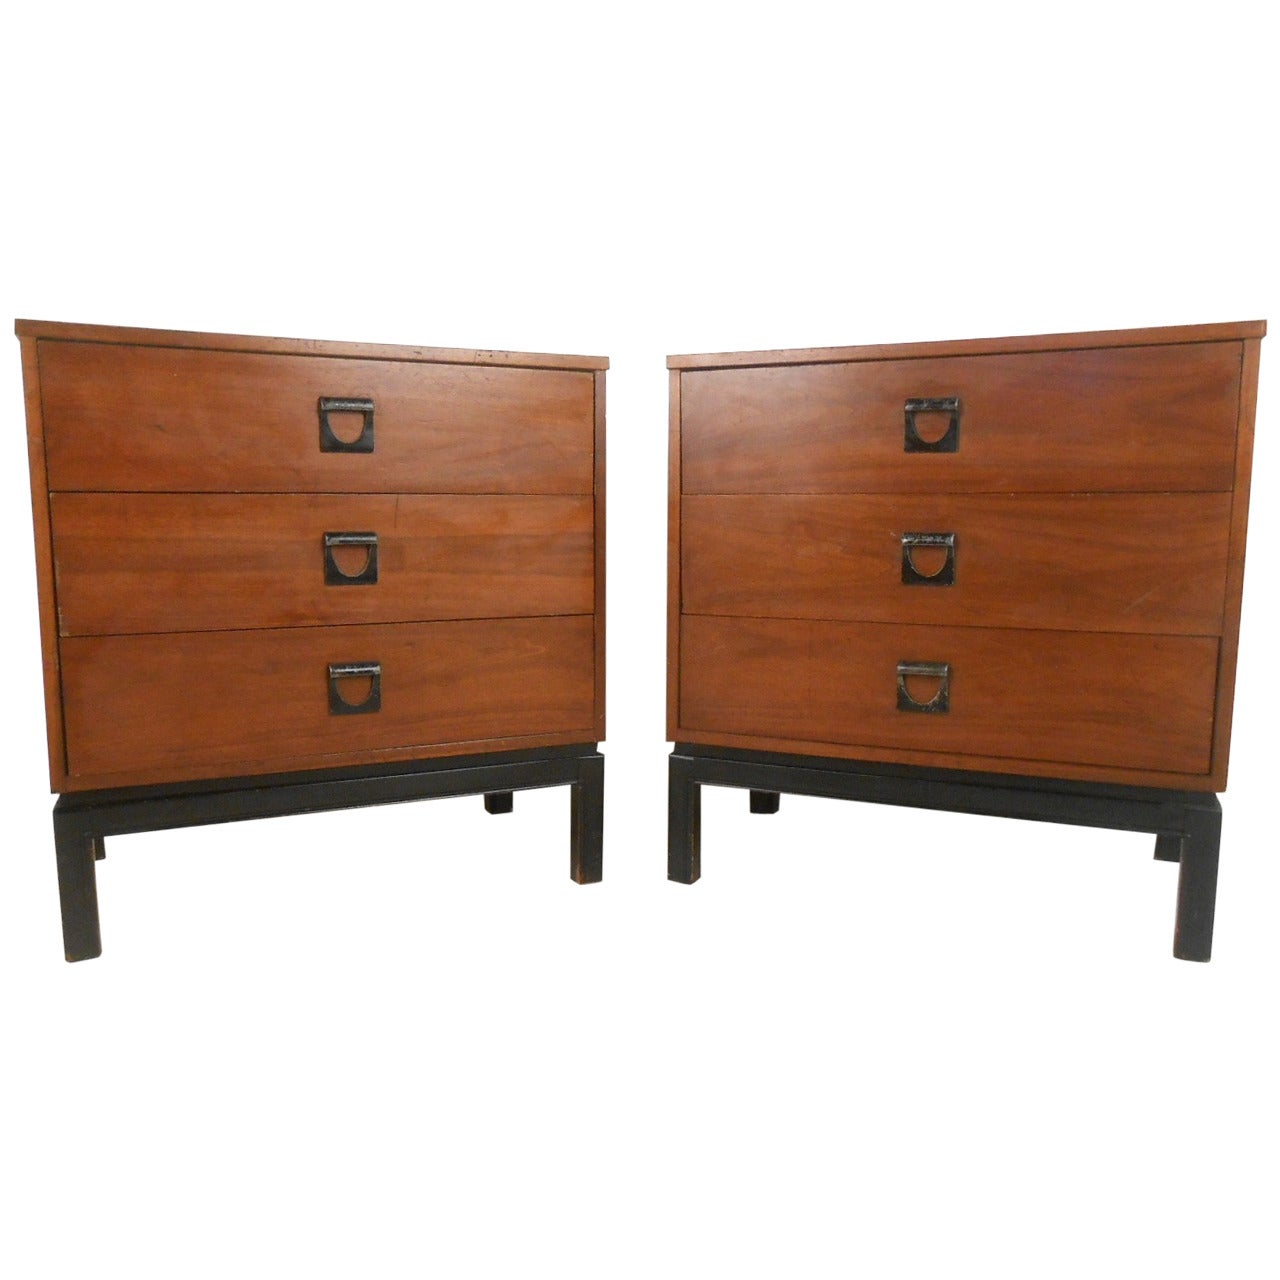 Unique Pair Mid-Century Modern George Nelson Style Dressers